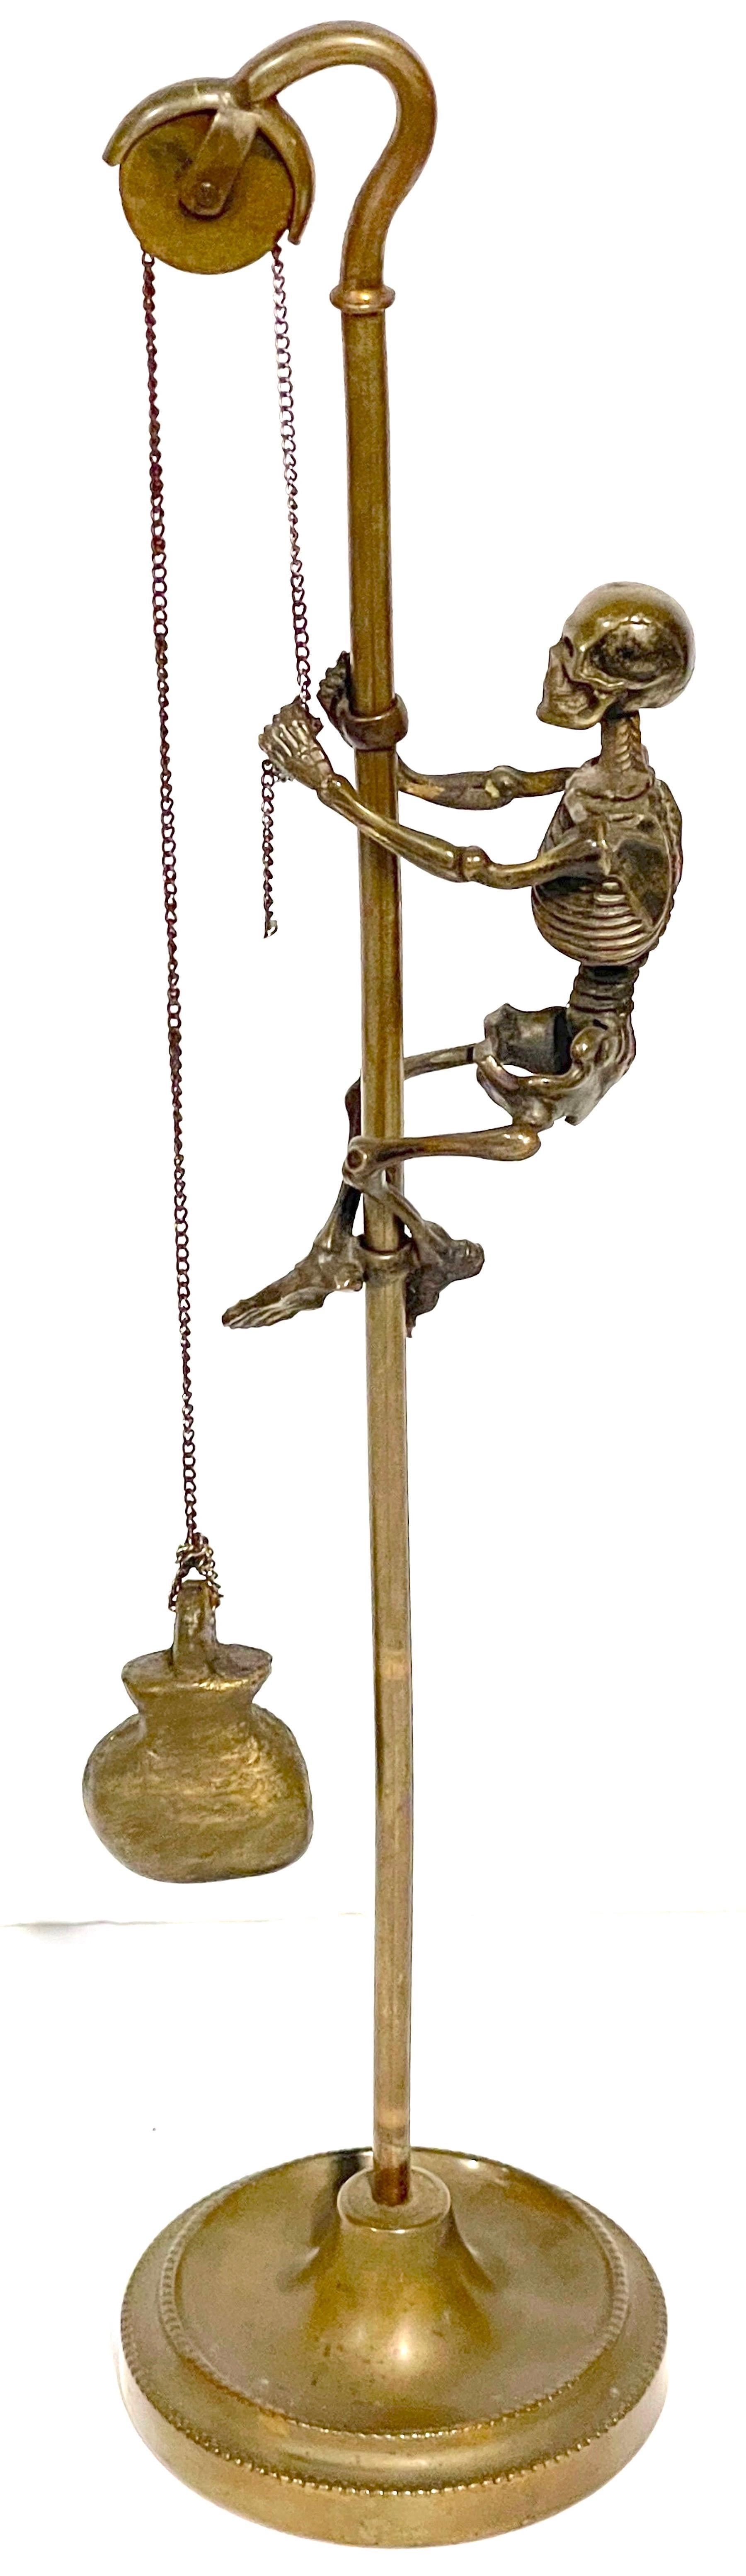 19th C European Bronze 'Memento Mori' /Analogical Mechanical Skeleton Sculpture 
Probably of French or Italian origin, Mid to late 19th Century, Unmarked. 

An exceptional 19th-century European bronze 'Memento Mori' mechanical skeleton sculpture,